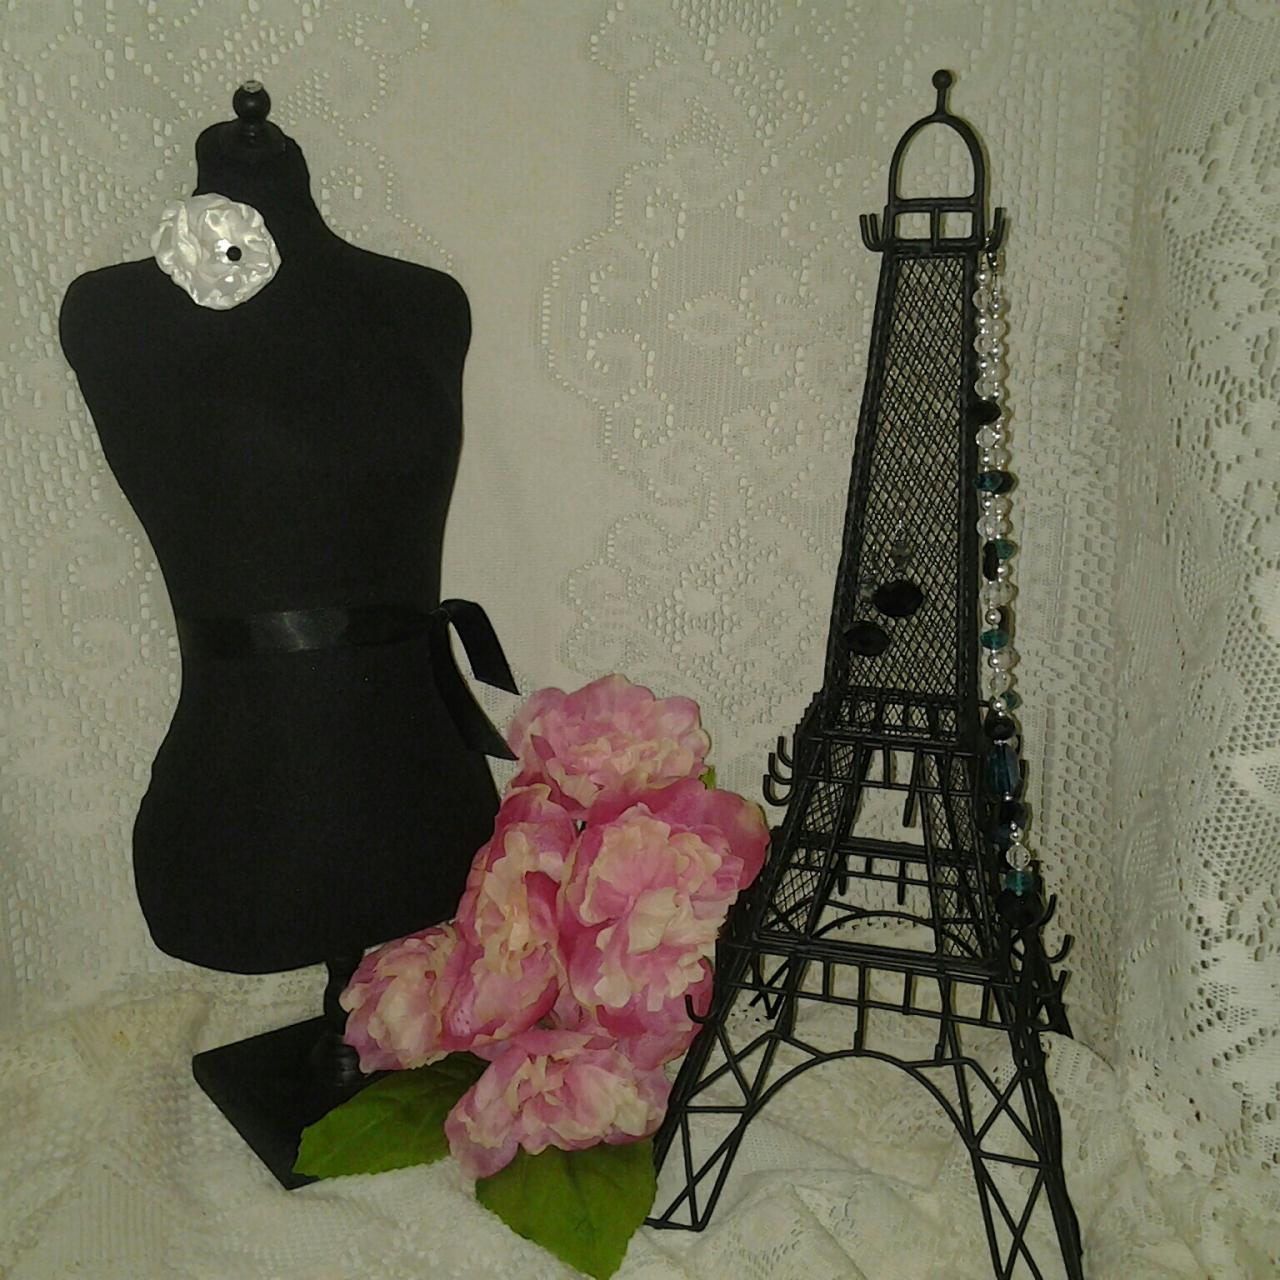 Boutique Dress Form Designs Jewelry Display, Black On Black 19 Inch Torso Great For Store Front Display, Pin Cushion Or Home Decor. Pick Flower